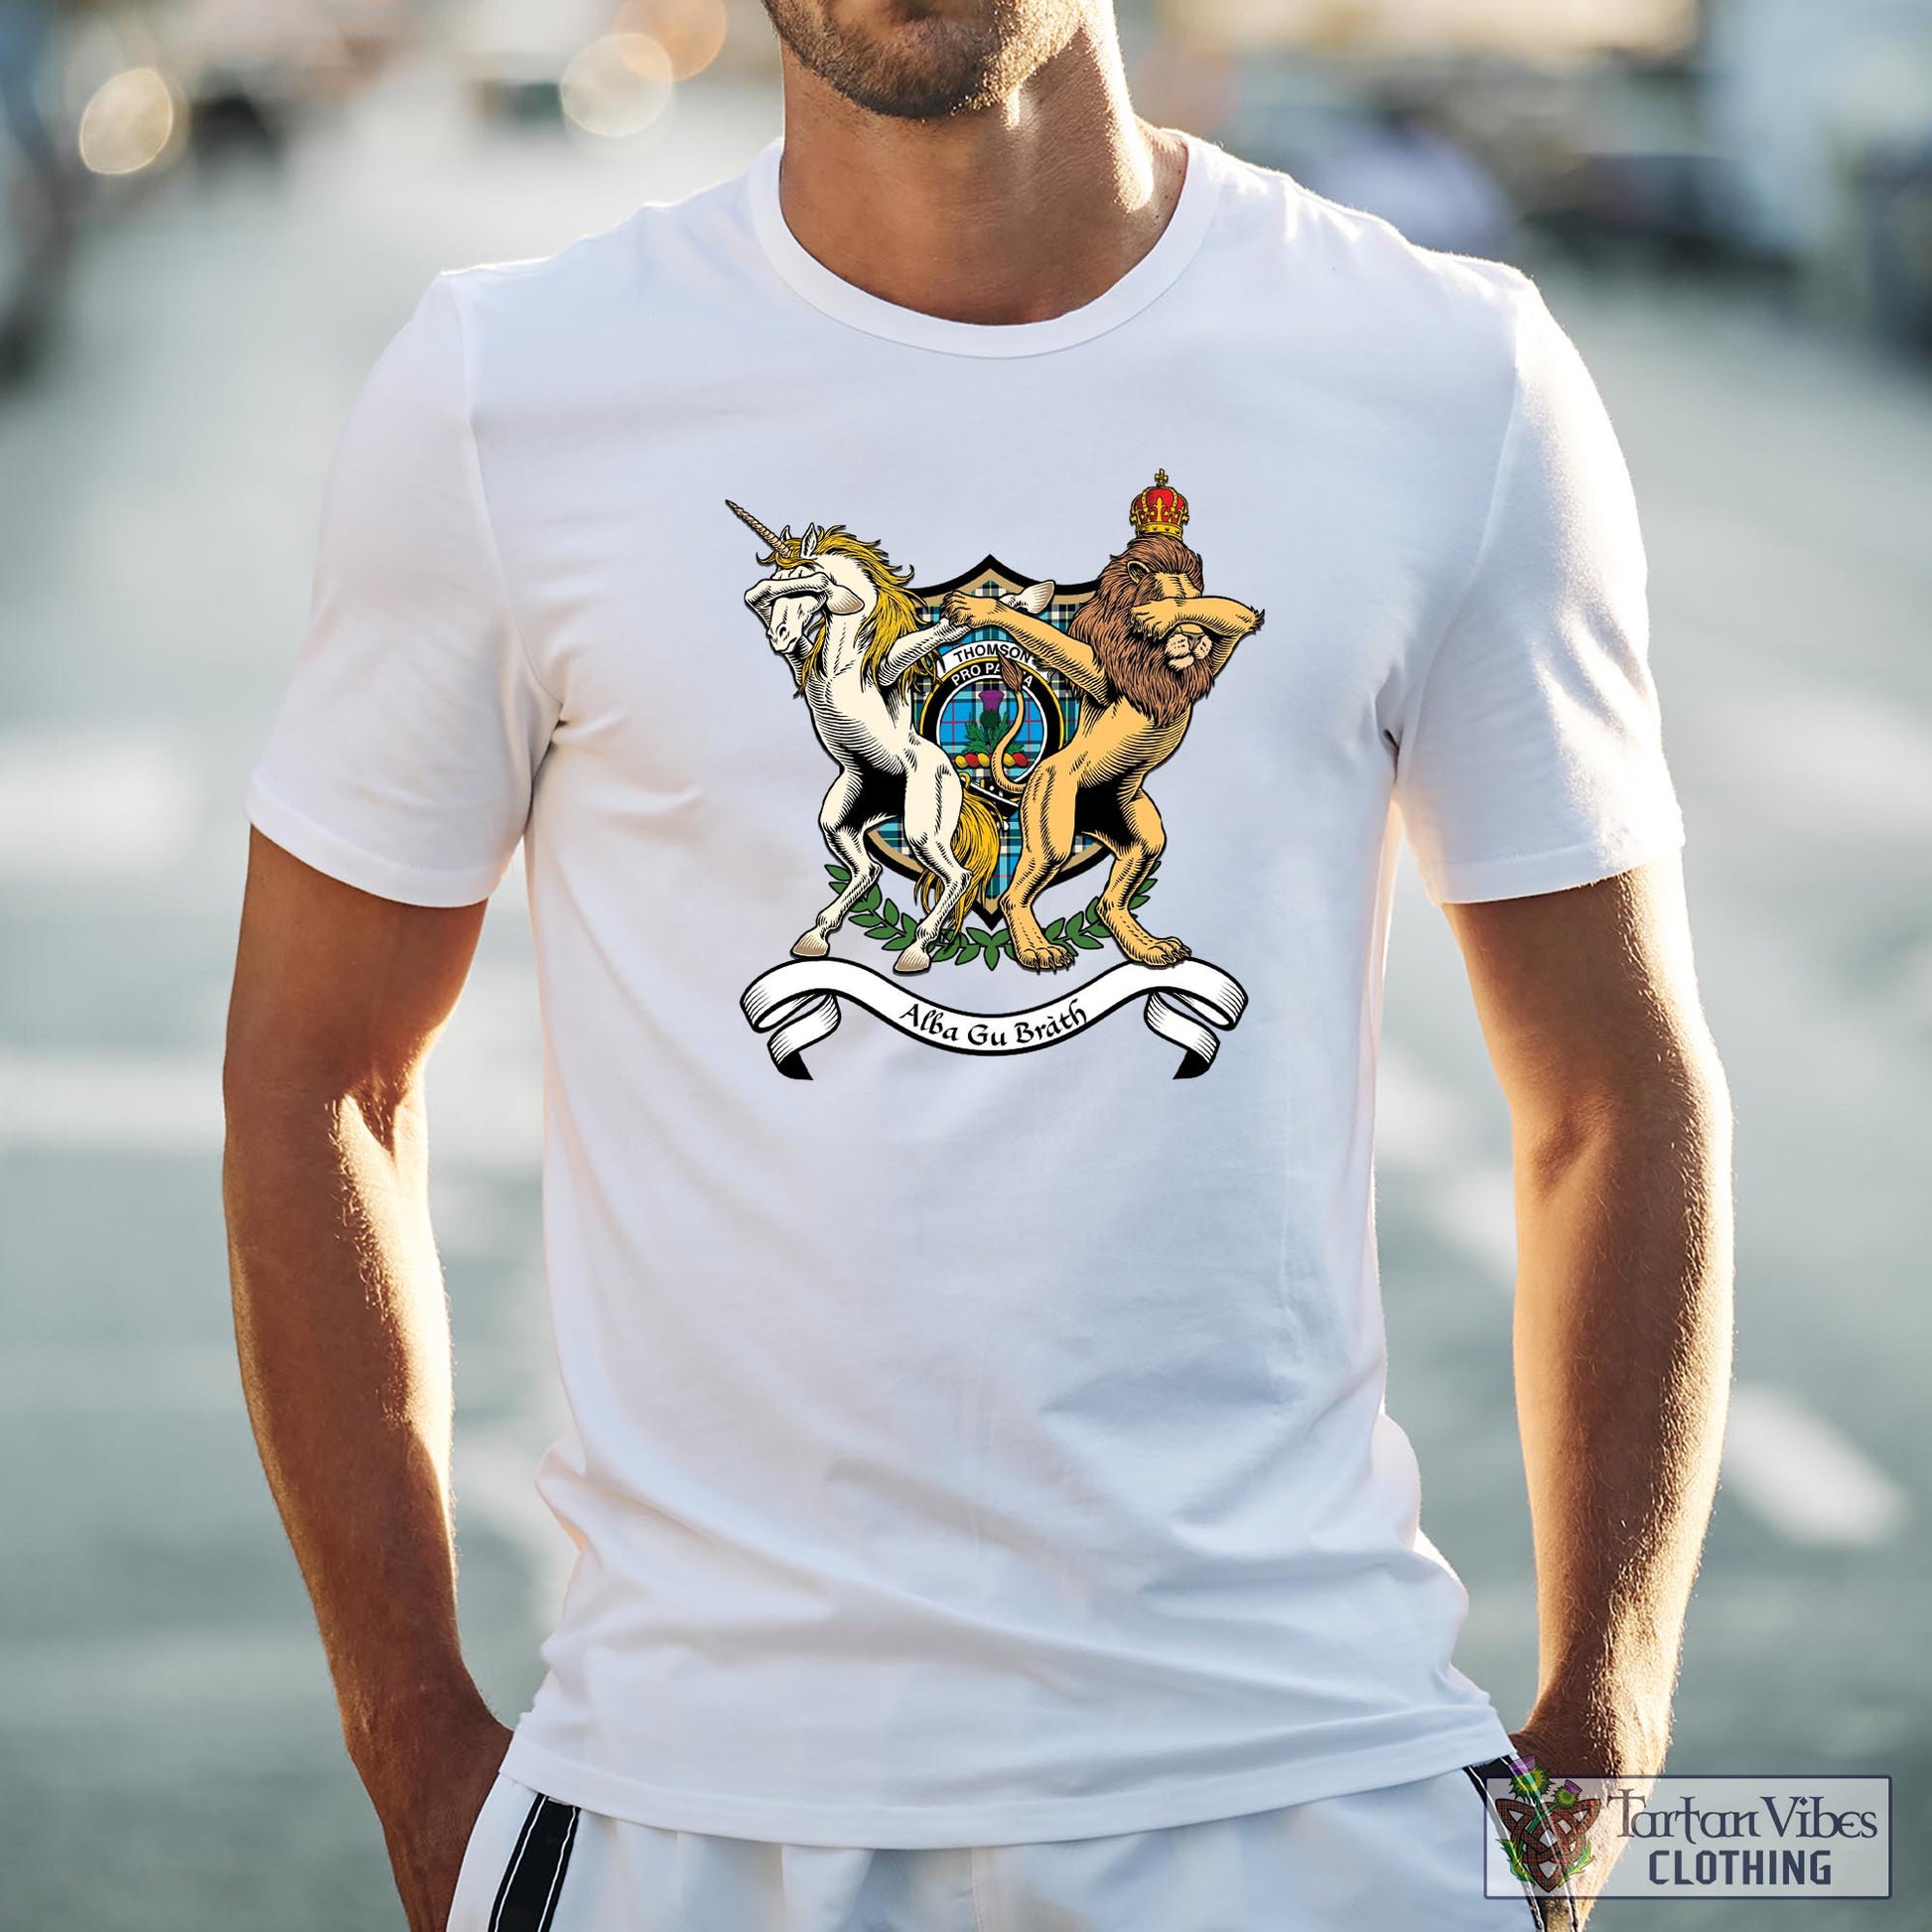 Tartan Vibes Clothing Thomson Family Crest Cotton Men's T-Shirt with Scotland Royal Coat Of Arm Funny Style